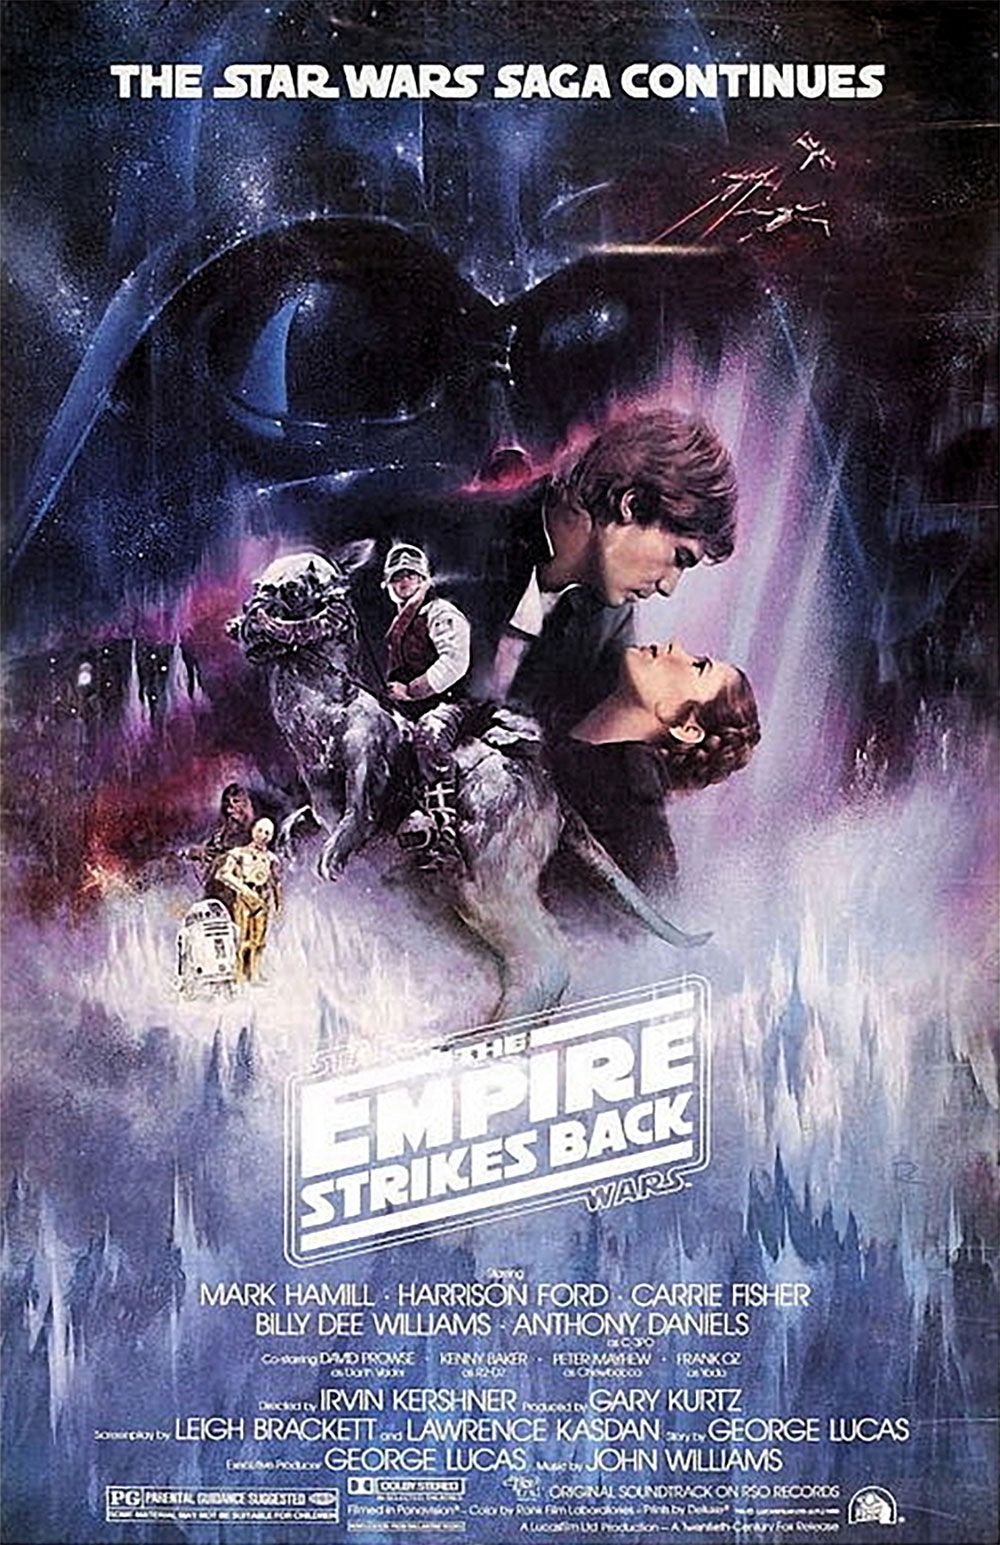 The original 1980s poster for Star Wars: The Empire Strikes Back